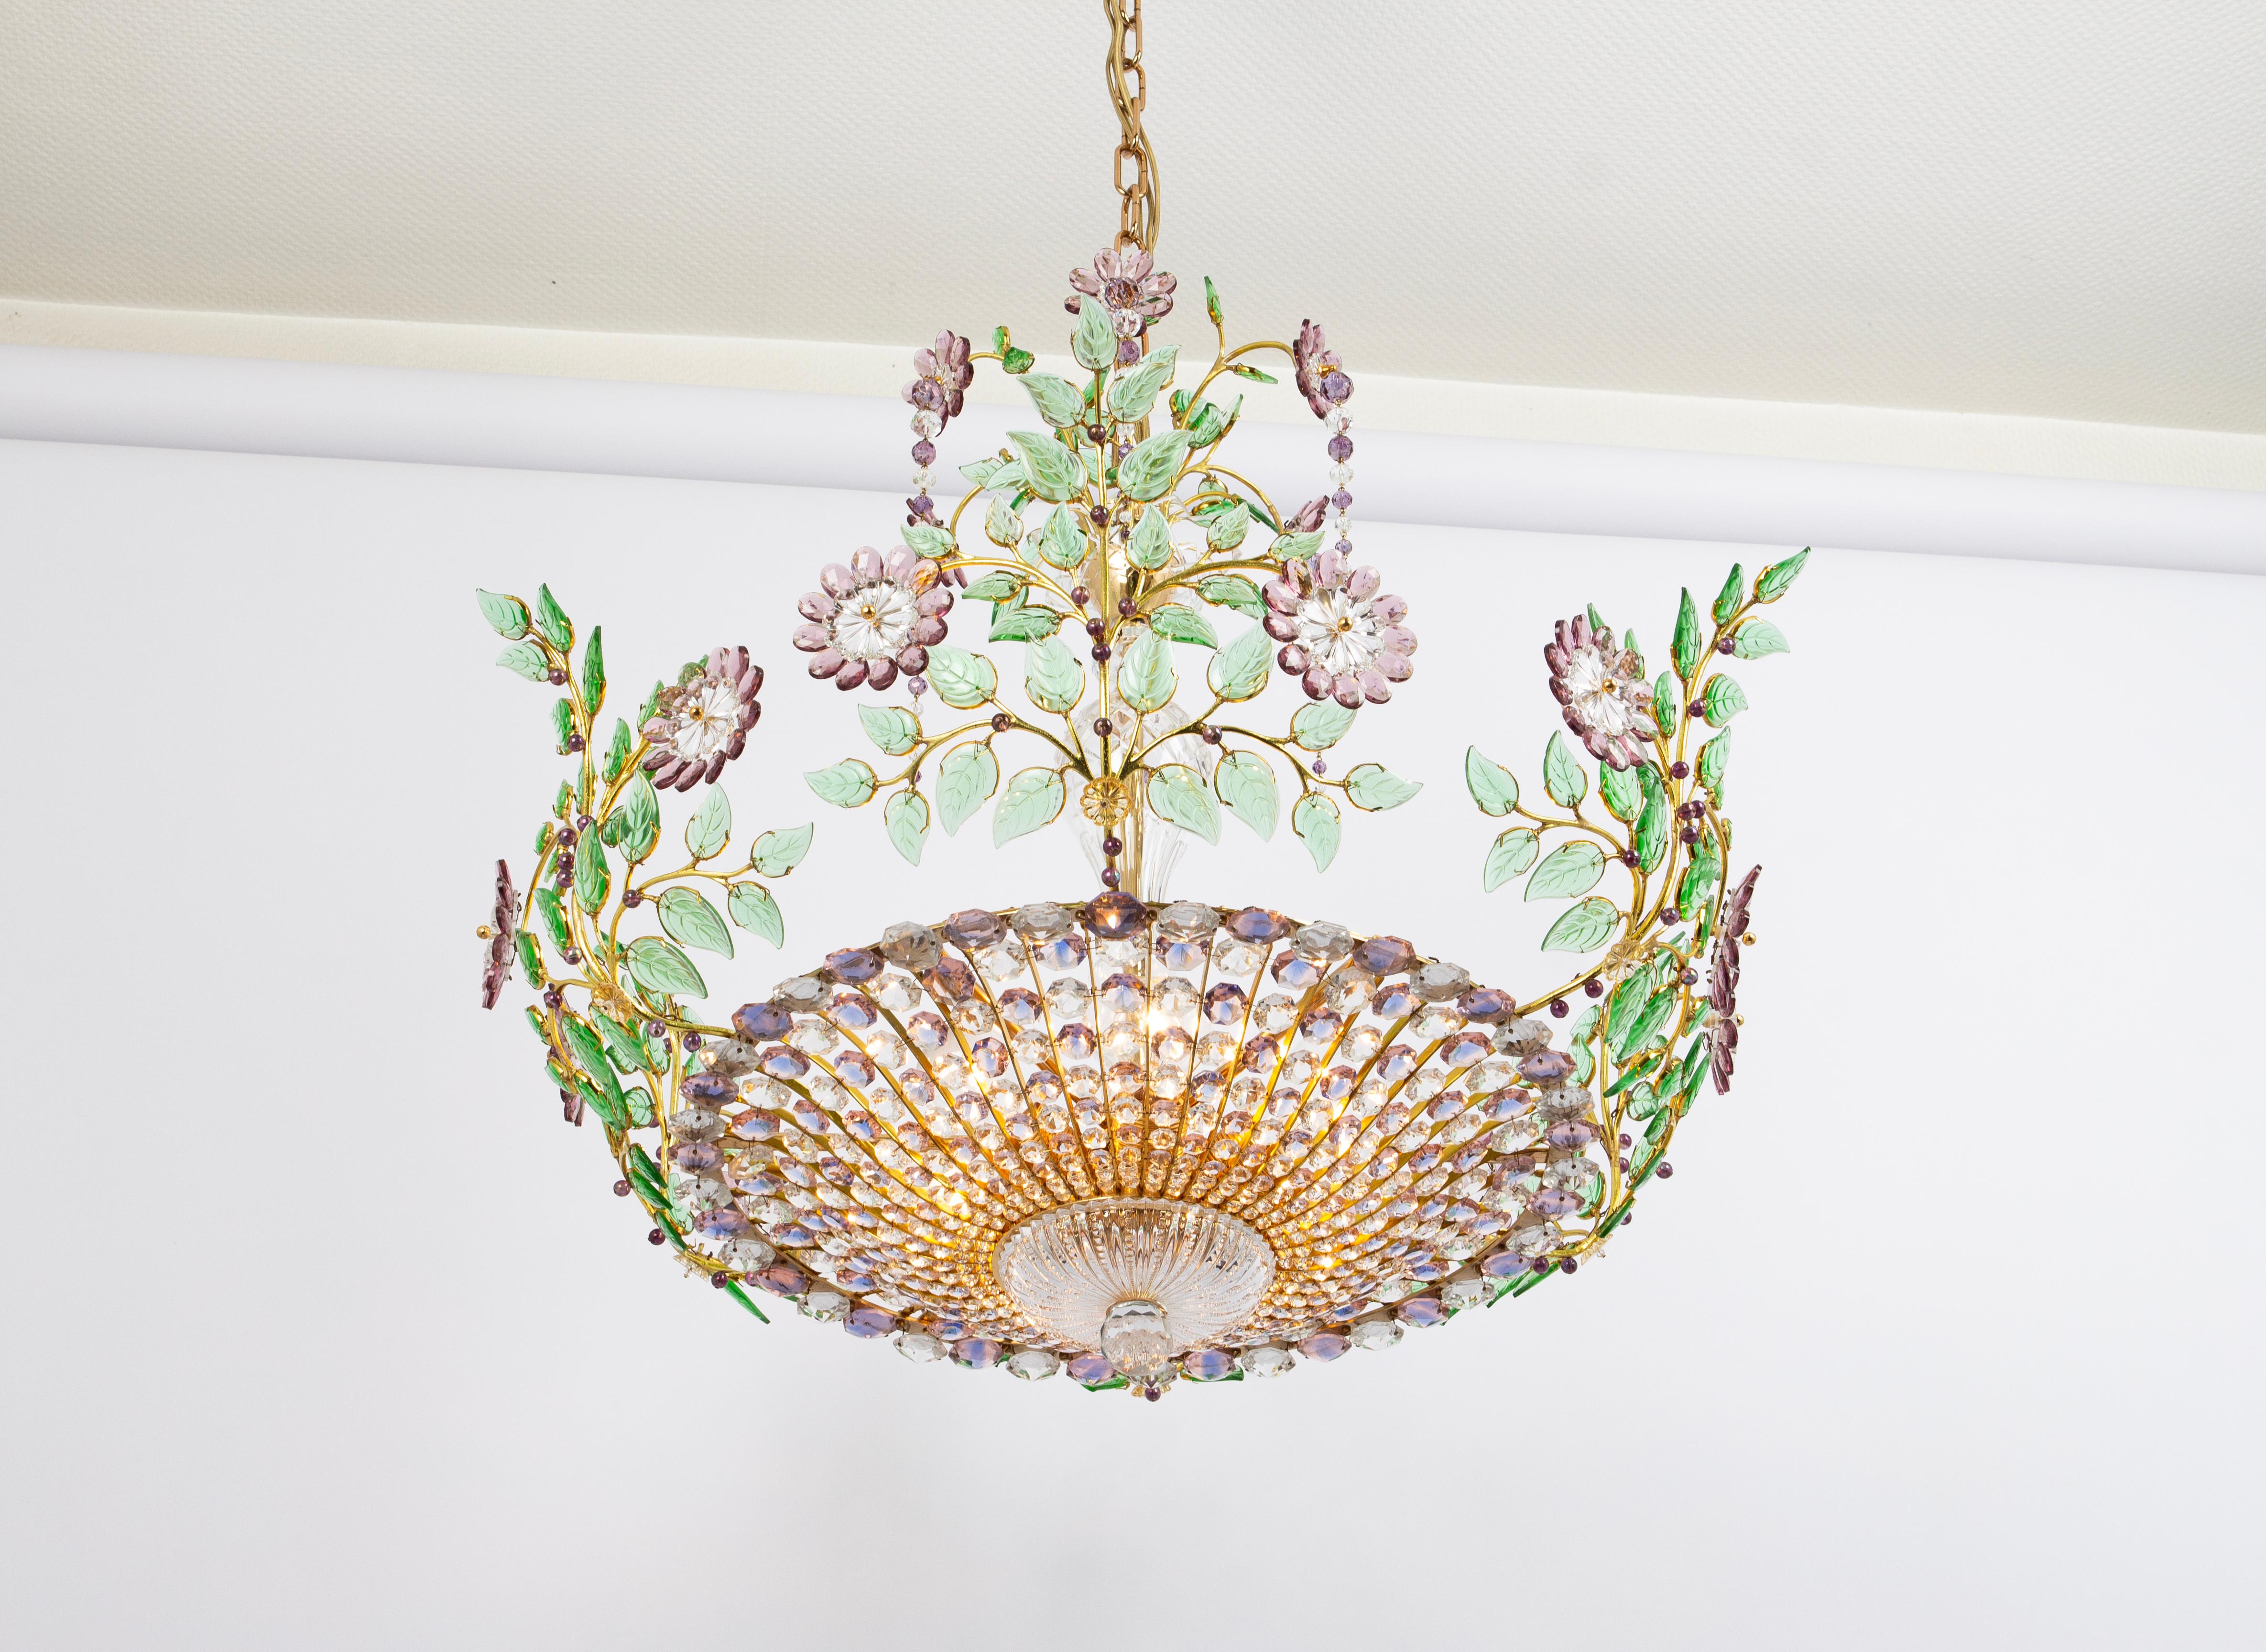 A Gorgeous, high-quality chandelier designed by Palwa, Germany, 1970s.(It is documented in the Palwa sales catalog)
It is made of a gilt brass frame and many crystals. Great scale and exquisite detail.
The Chandelier takes 6 x E27 (standard Bulbs up